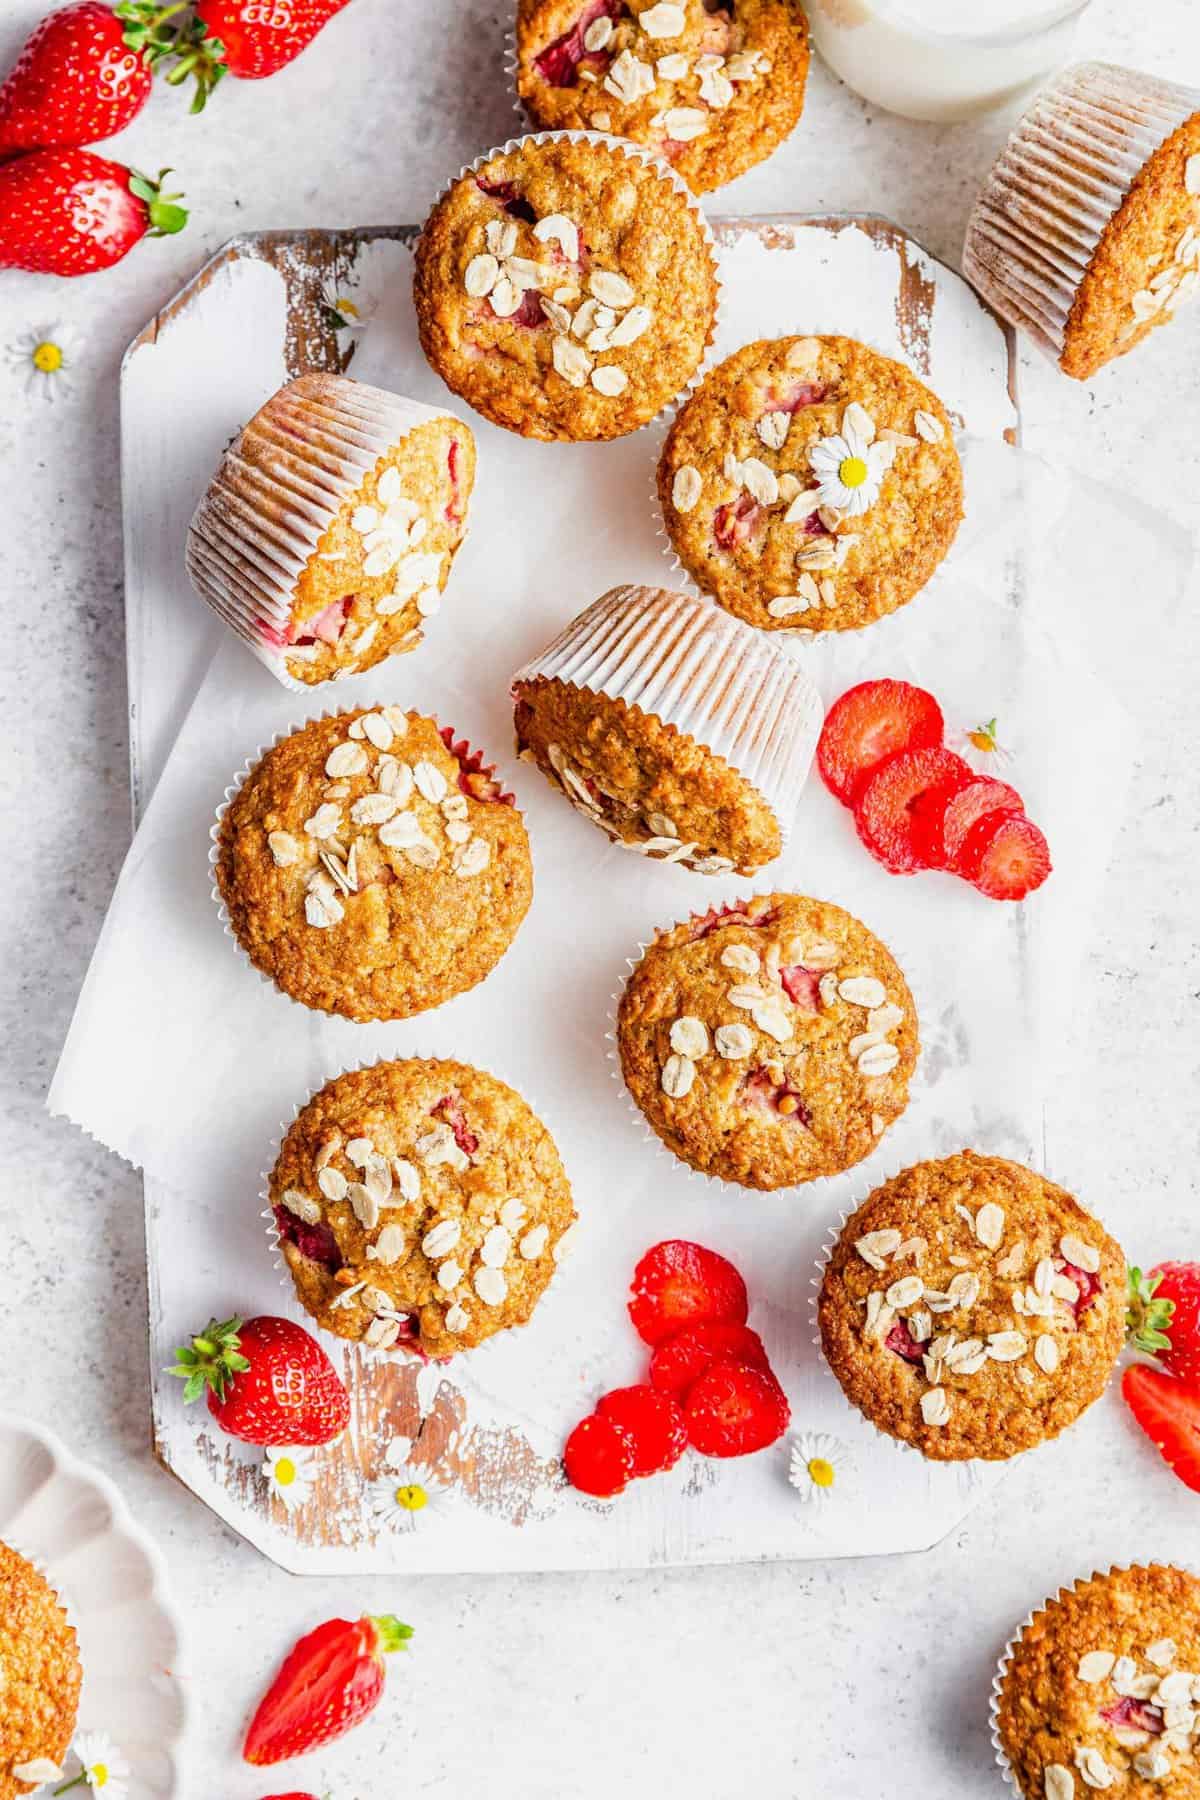 Overhead view of strawberry oatmeal muffins on rustic wooden board with fresh strawberries